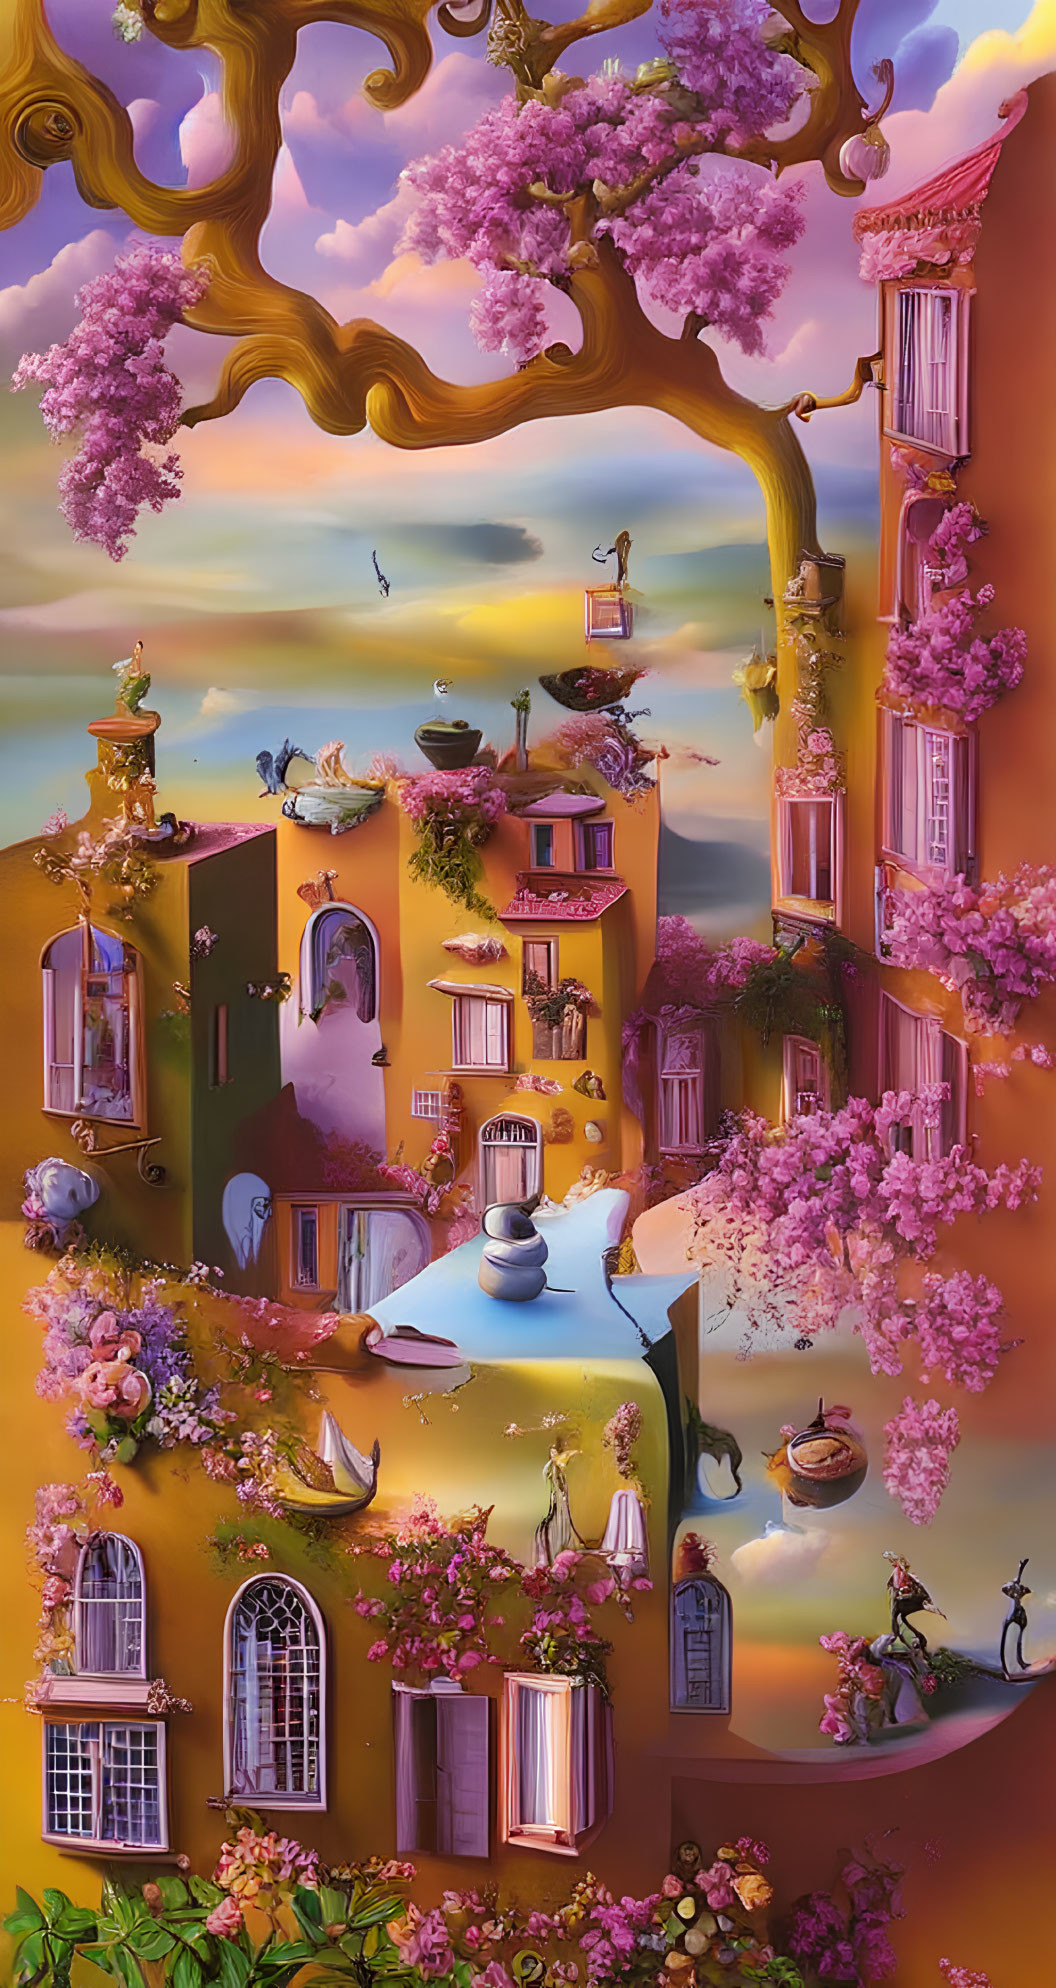 Colorful vertical village with cherry trees, canals, boats, and a man at sunset